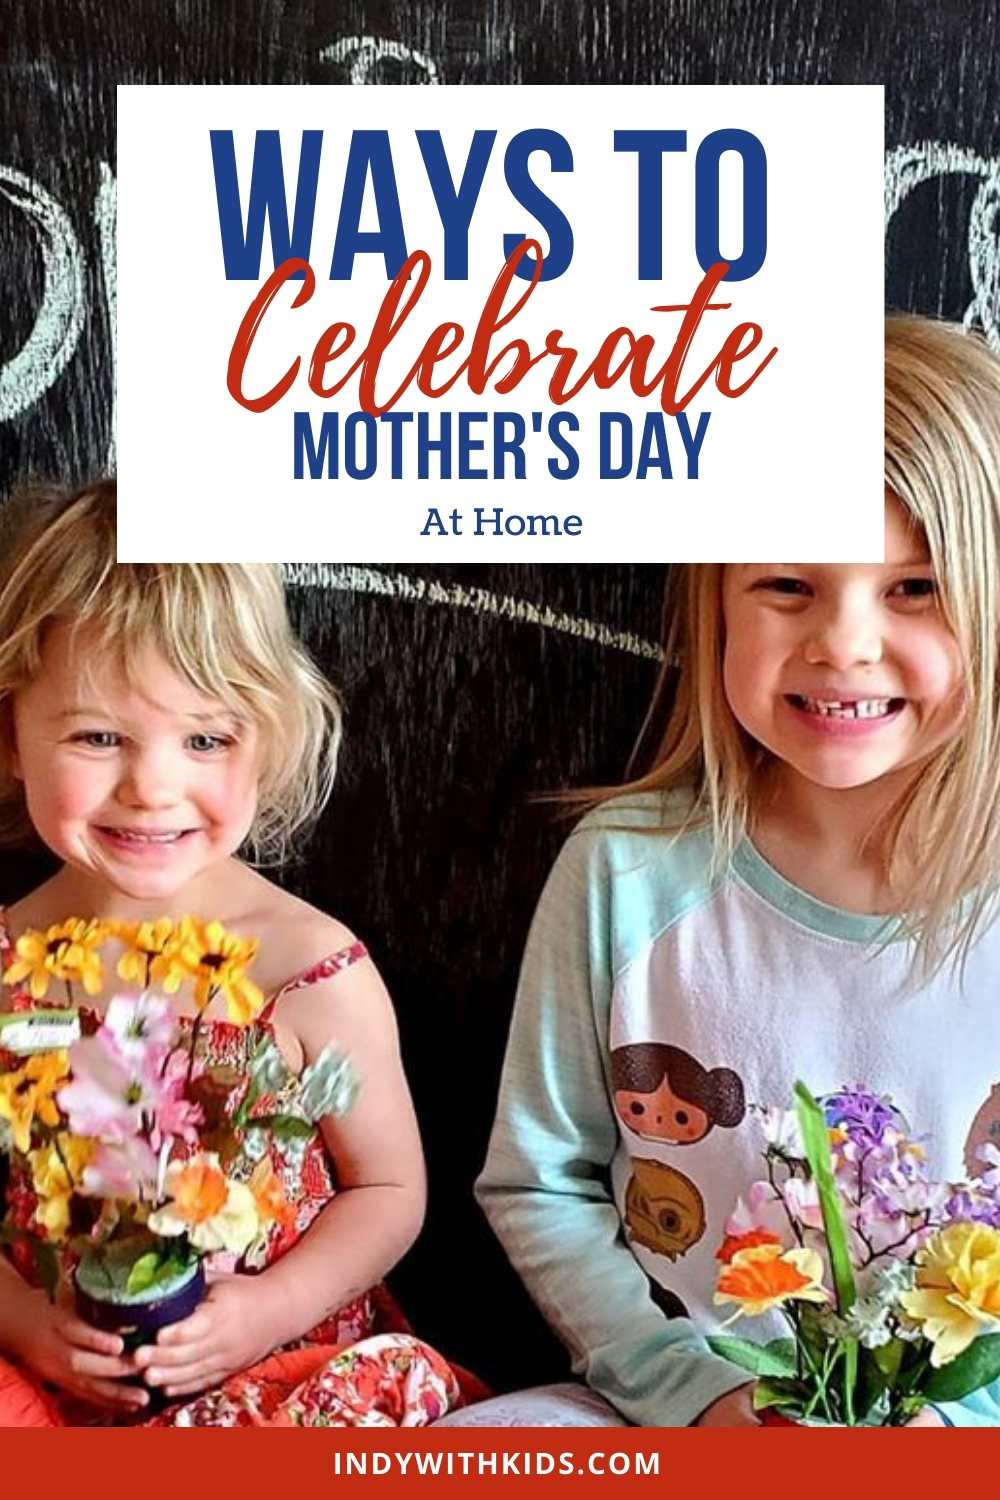 Happy Mother's Day: 10 ways to celebrate the special day with your mom